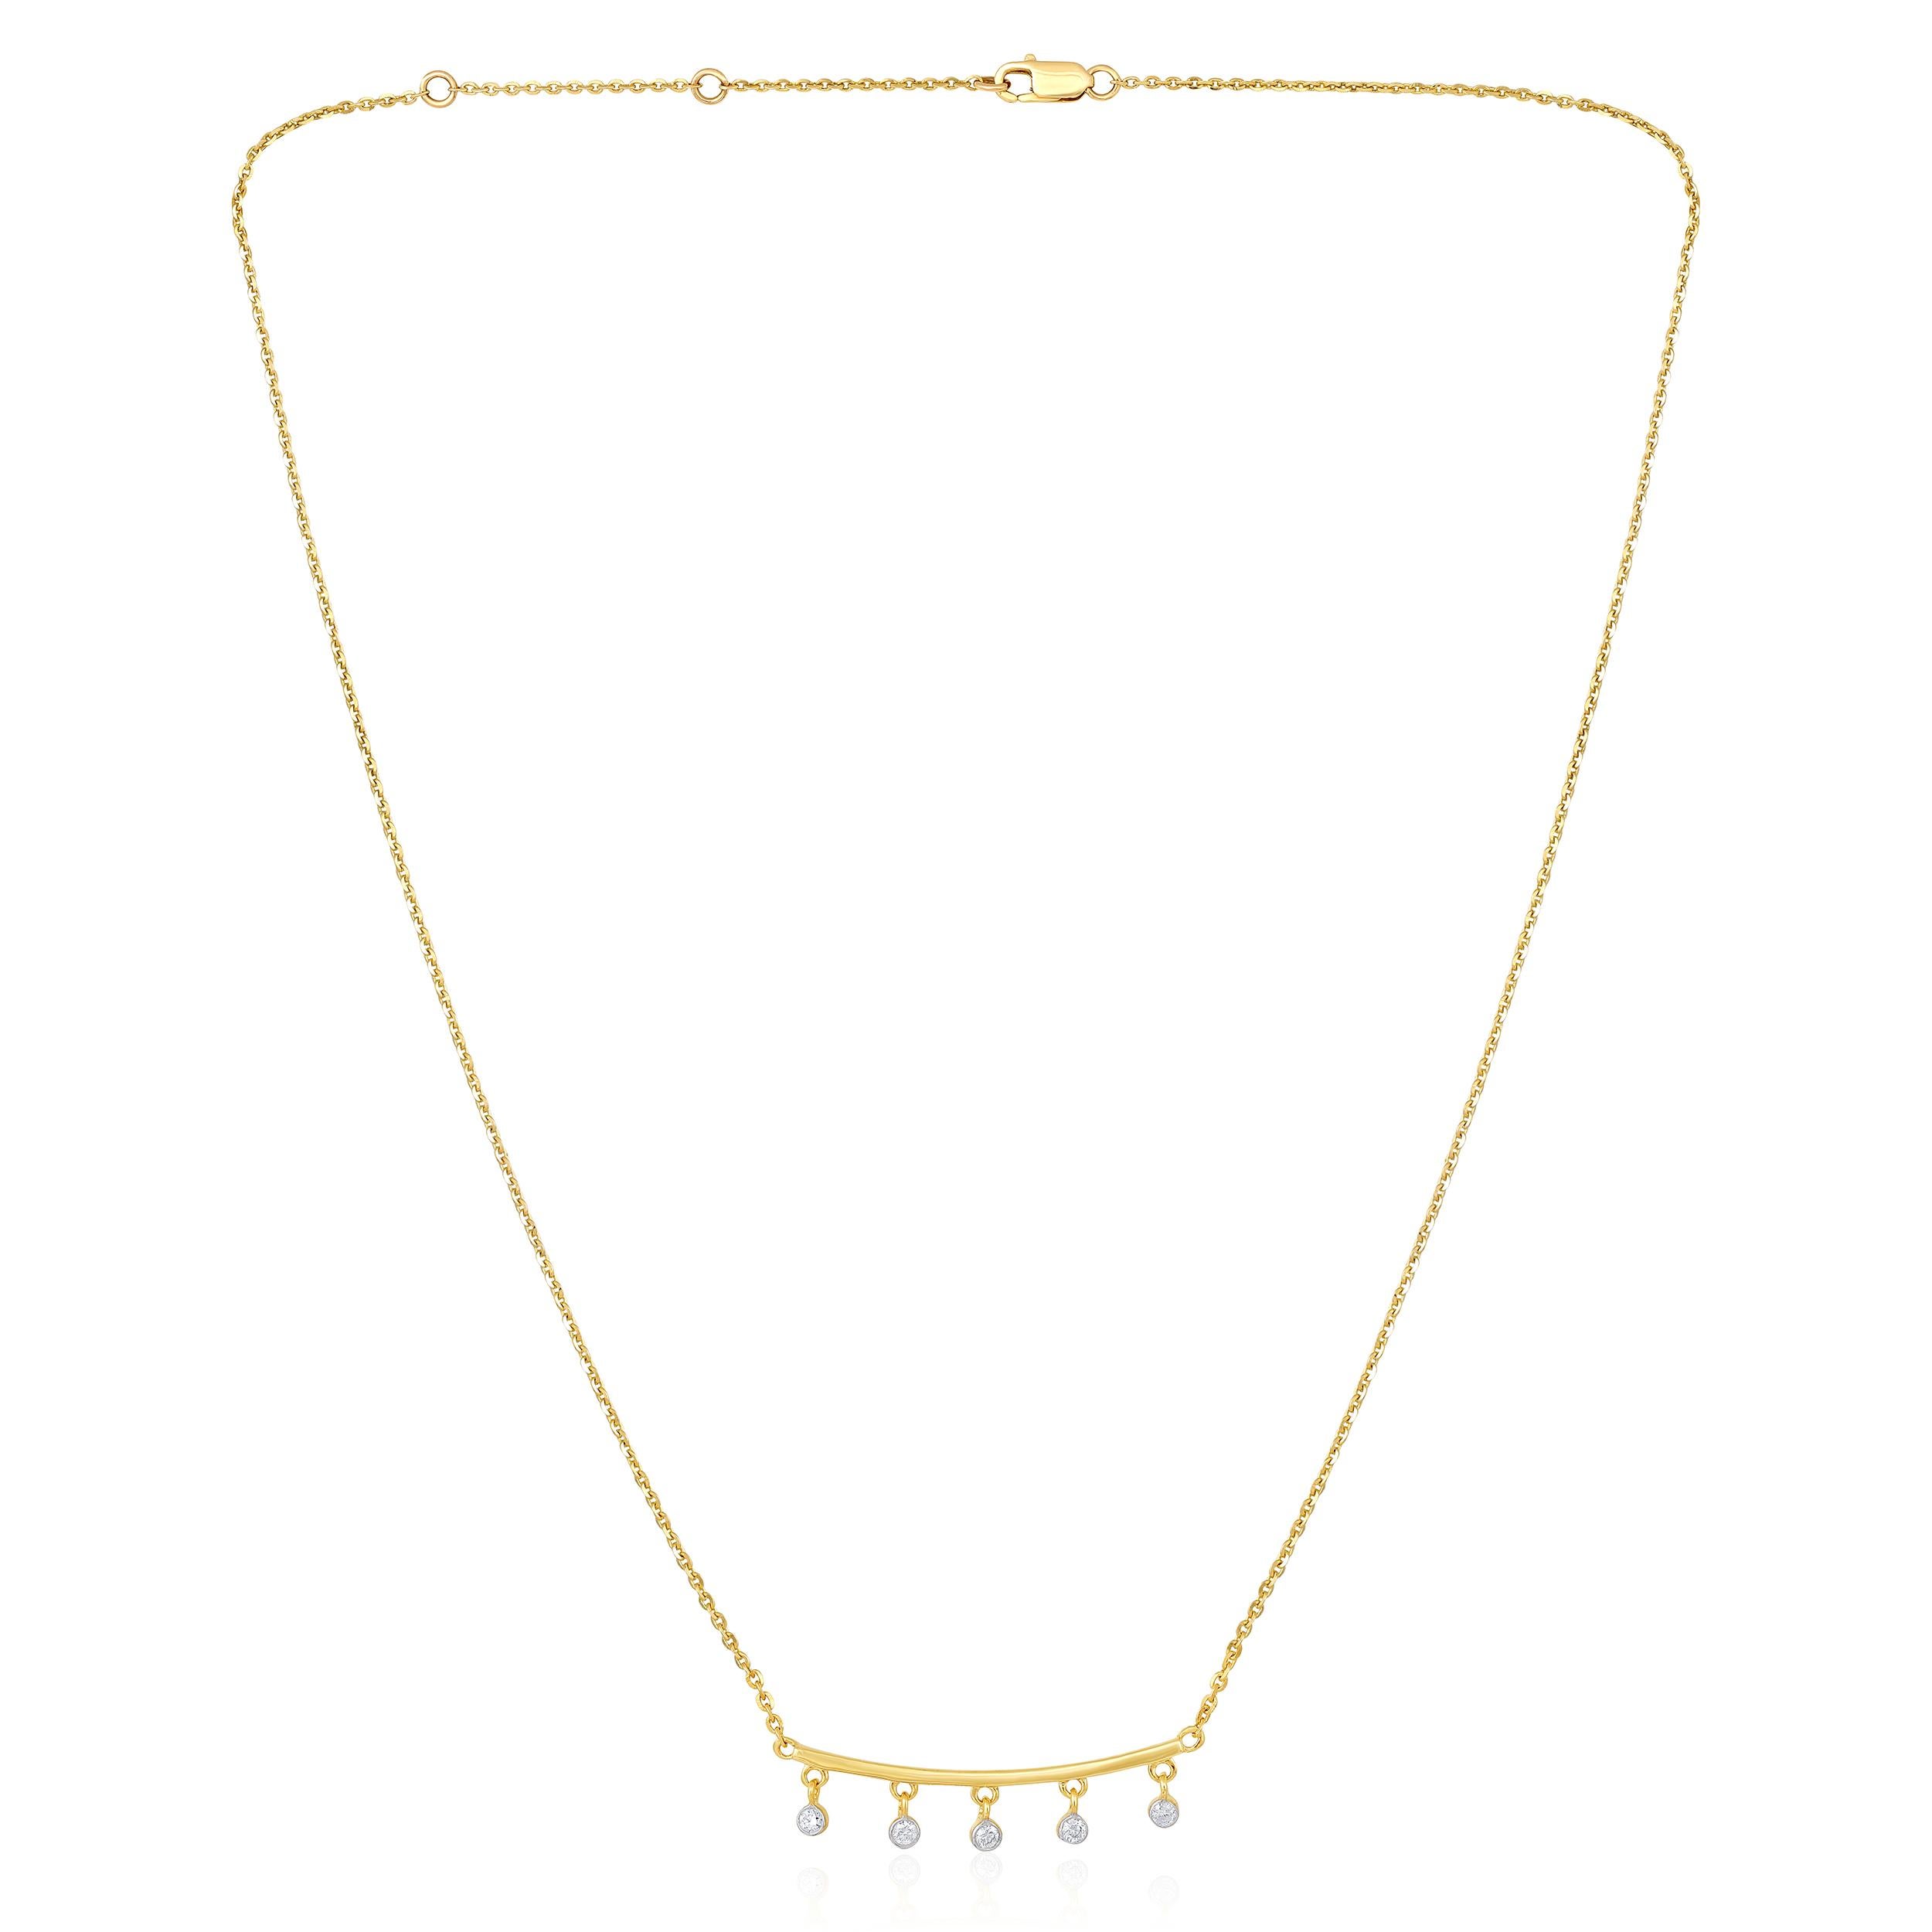 Crafted in 3.64 grams of 14K Yellow Gold, the necklace contains 5 stones of Round Diamonds with a total of 0.125 carat in F-G color and I1-I2 carat. The necklace length is 18 inches.

This jewelry piece will be expertly crafted by our skilled